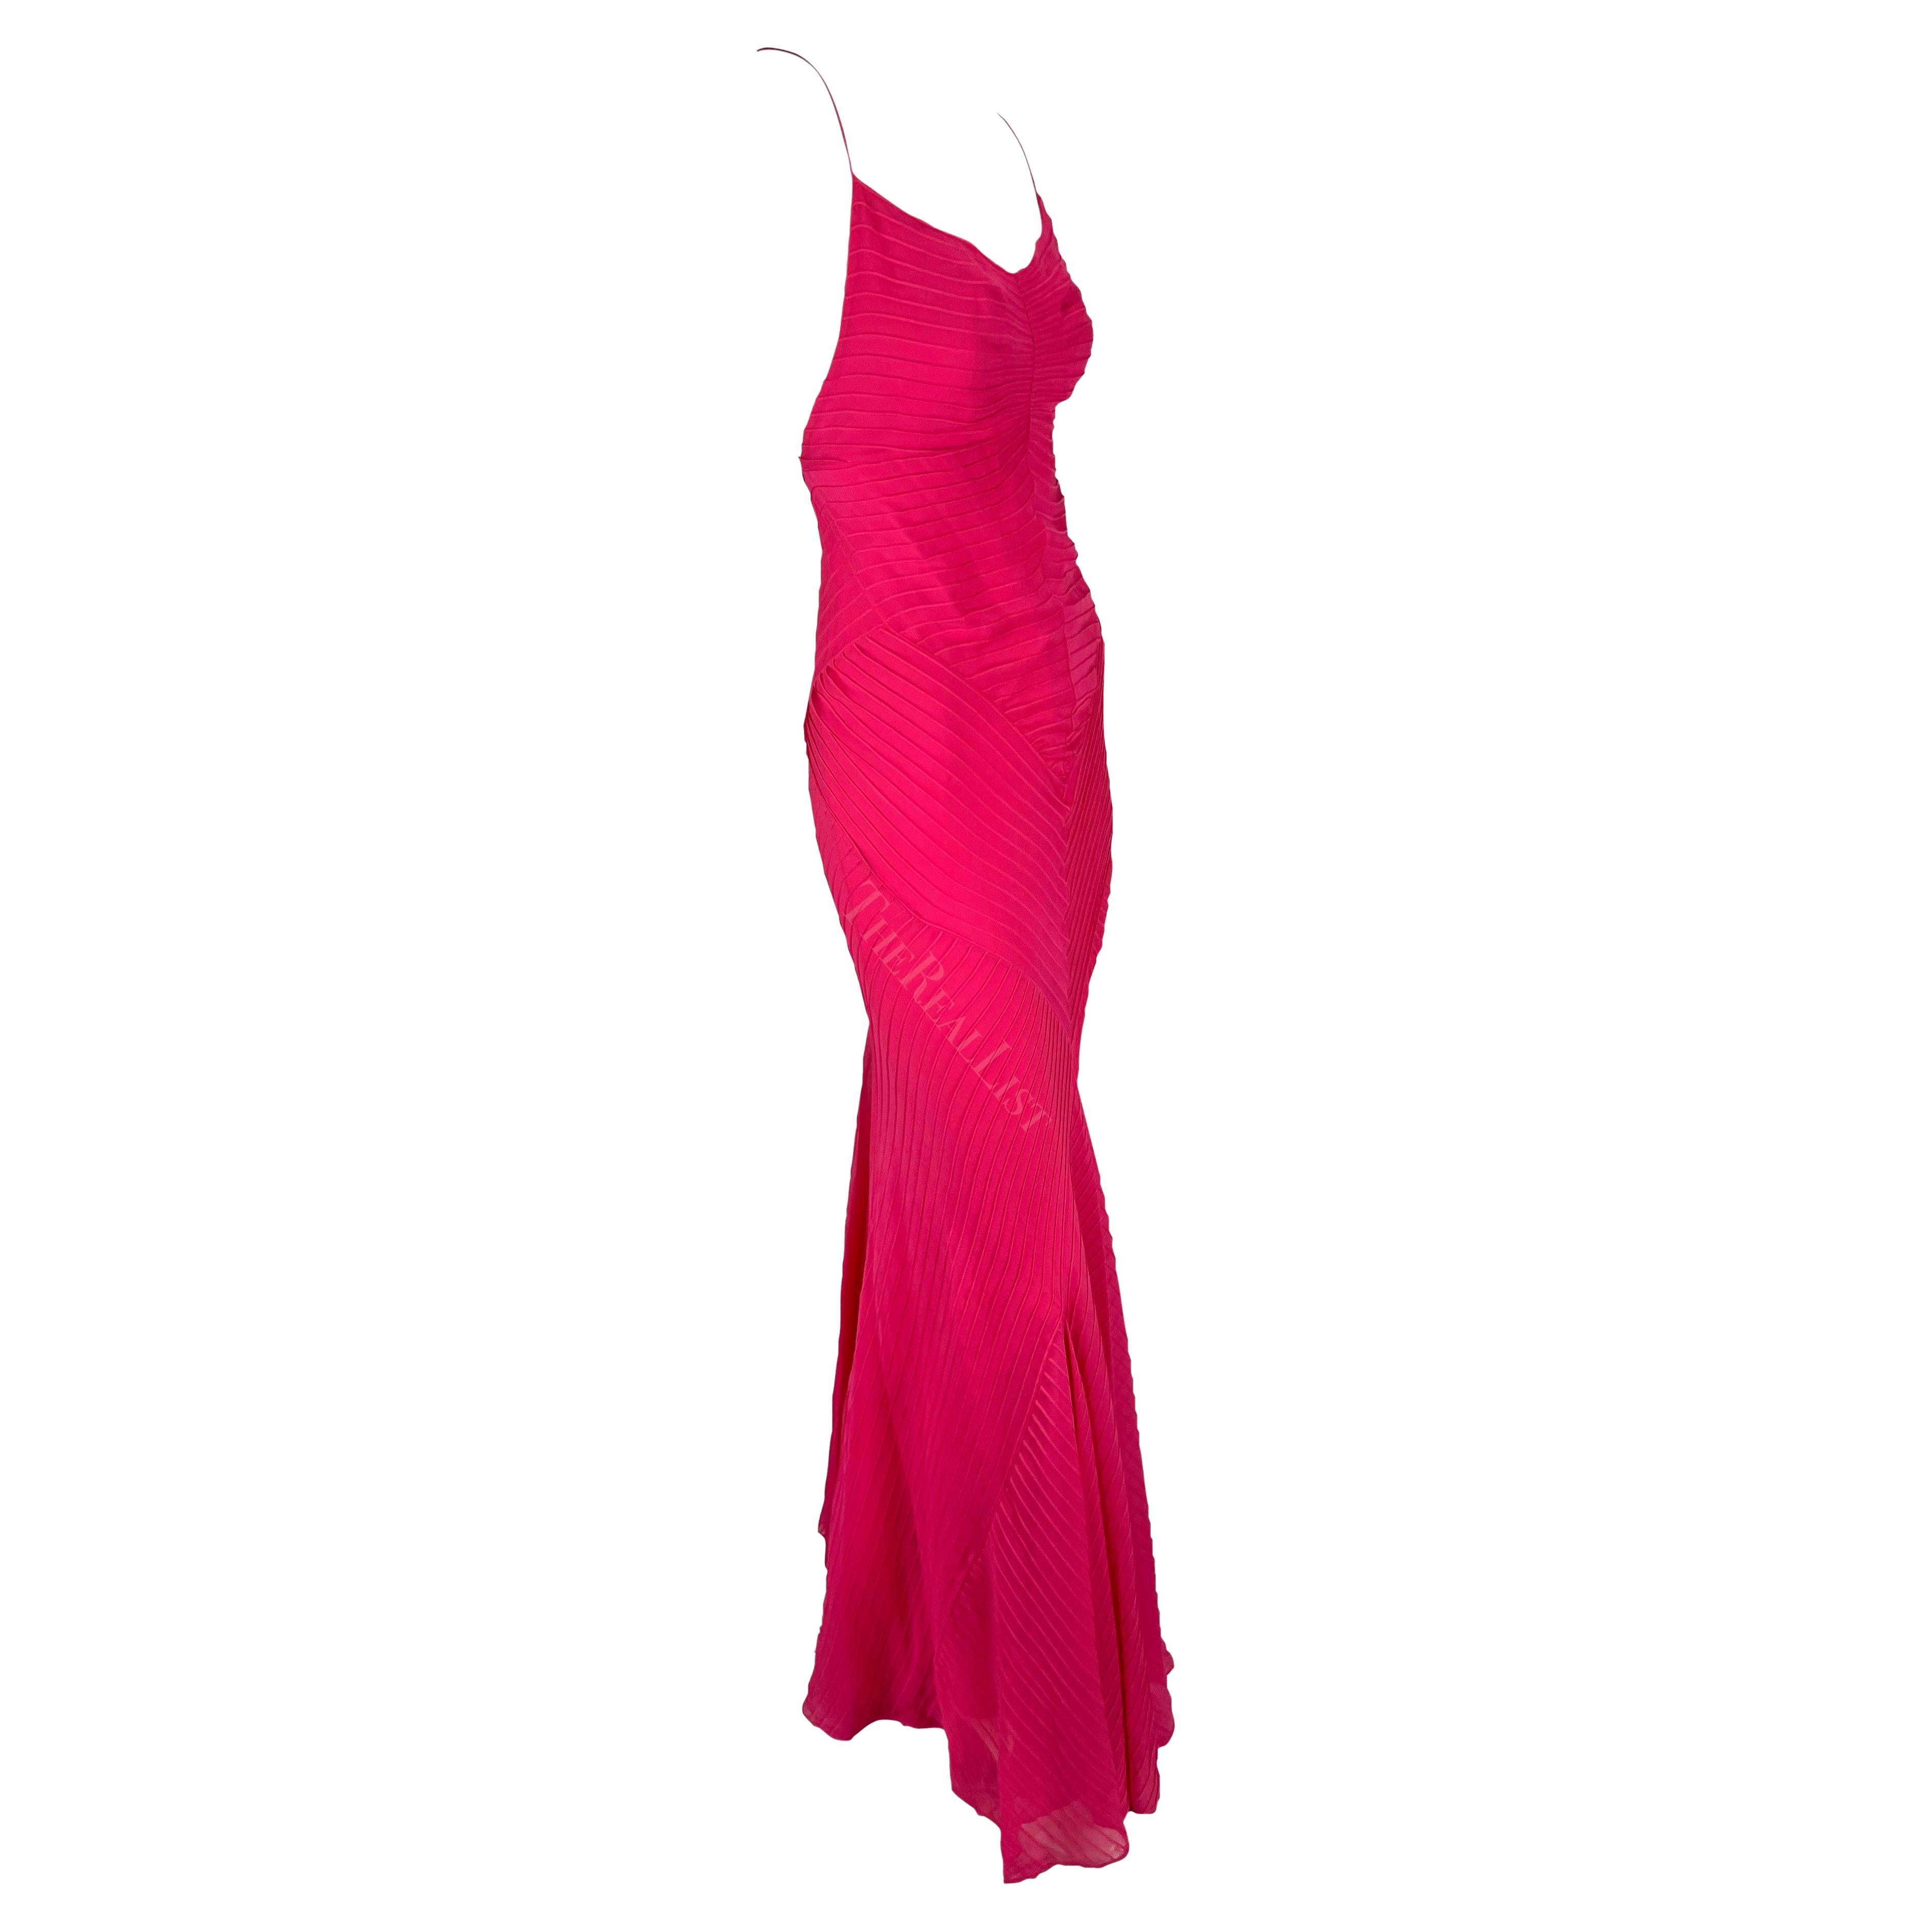 S/S 2004 Ralph Lauren Runway Hot Pink Pleated Chiffon Backless Cowl Gown 7